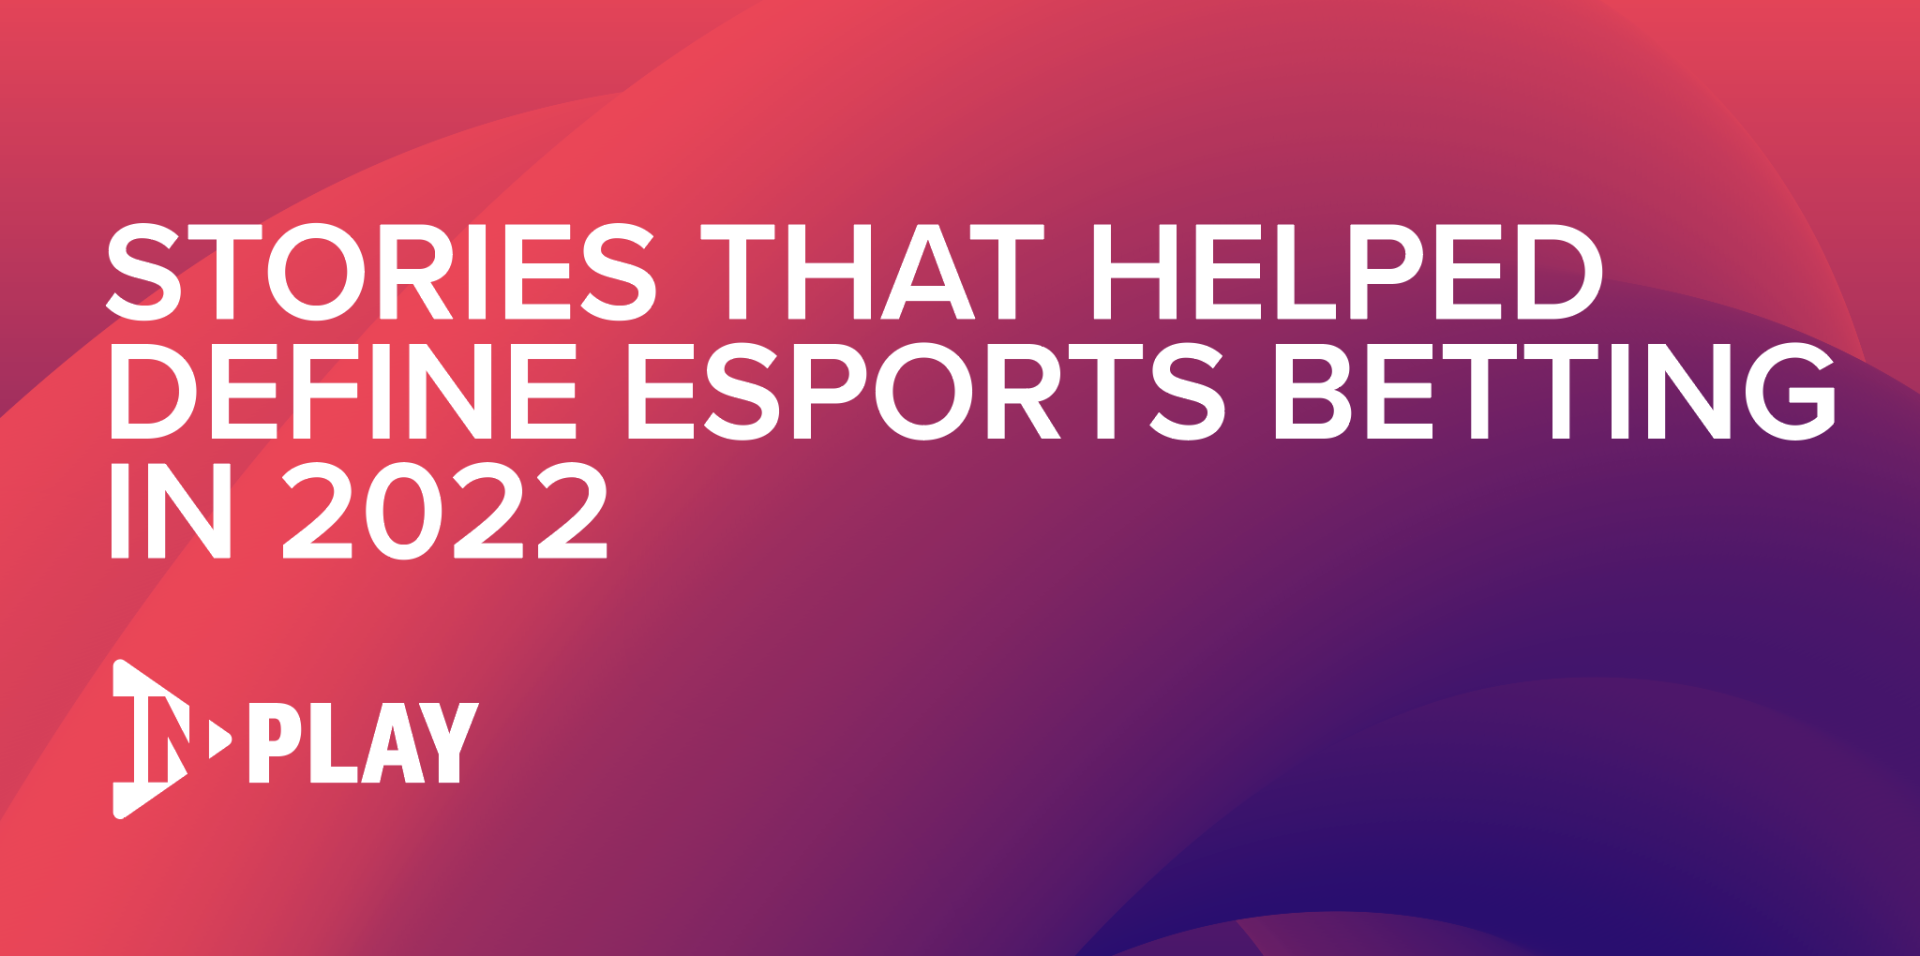 Stories that helped define esports betting in 2022